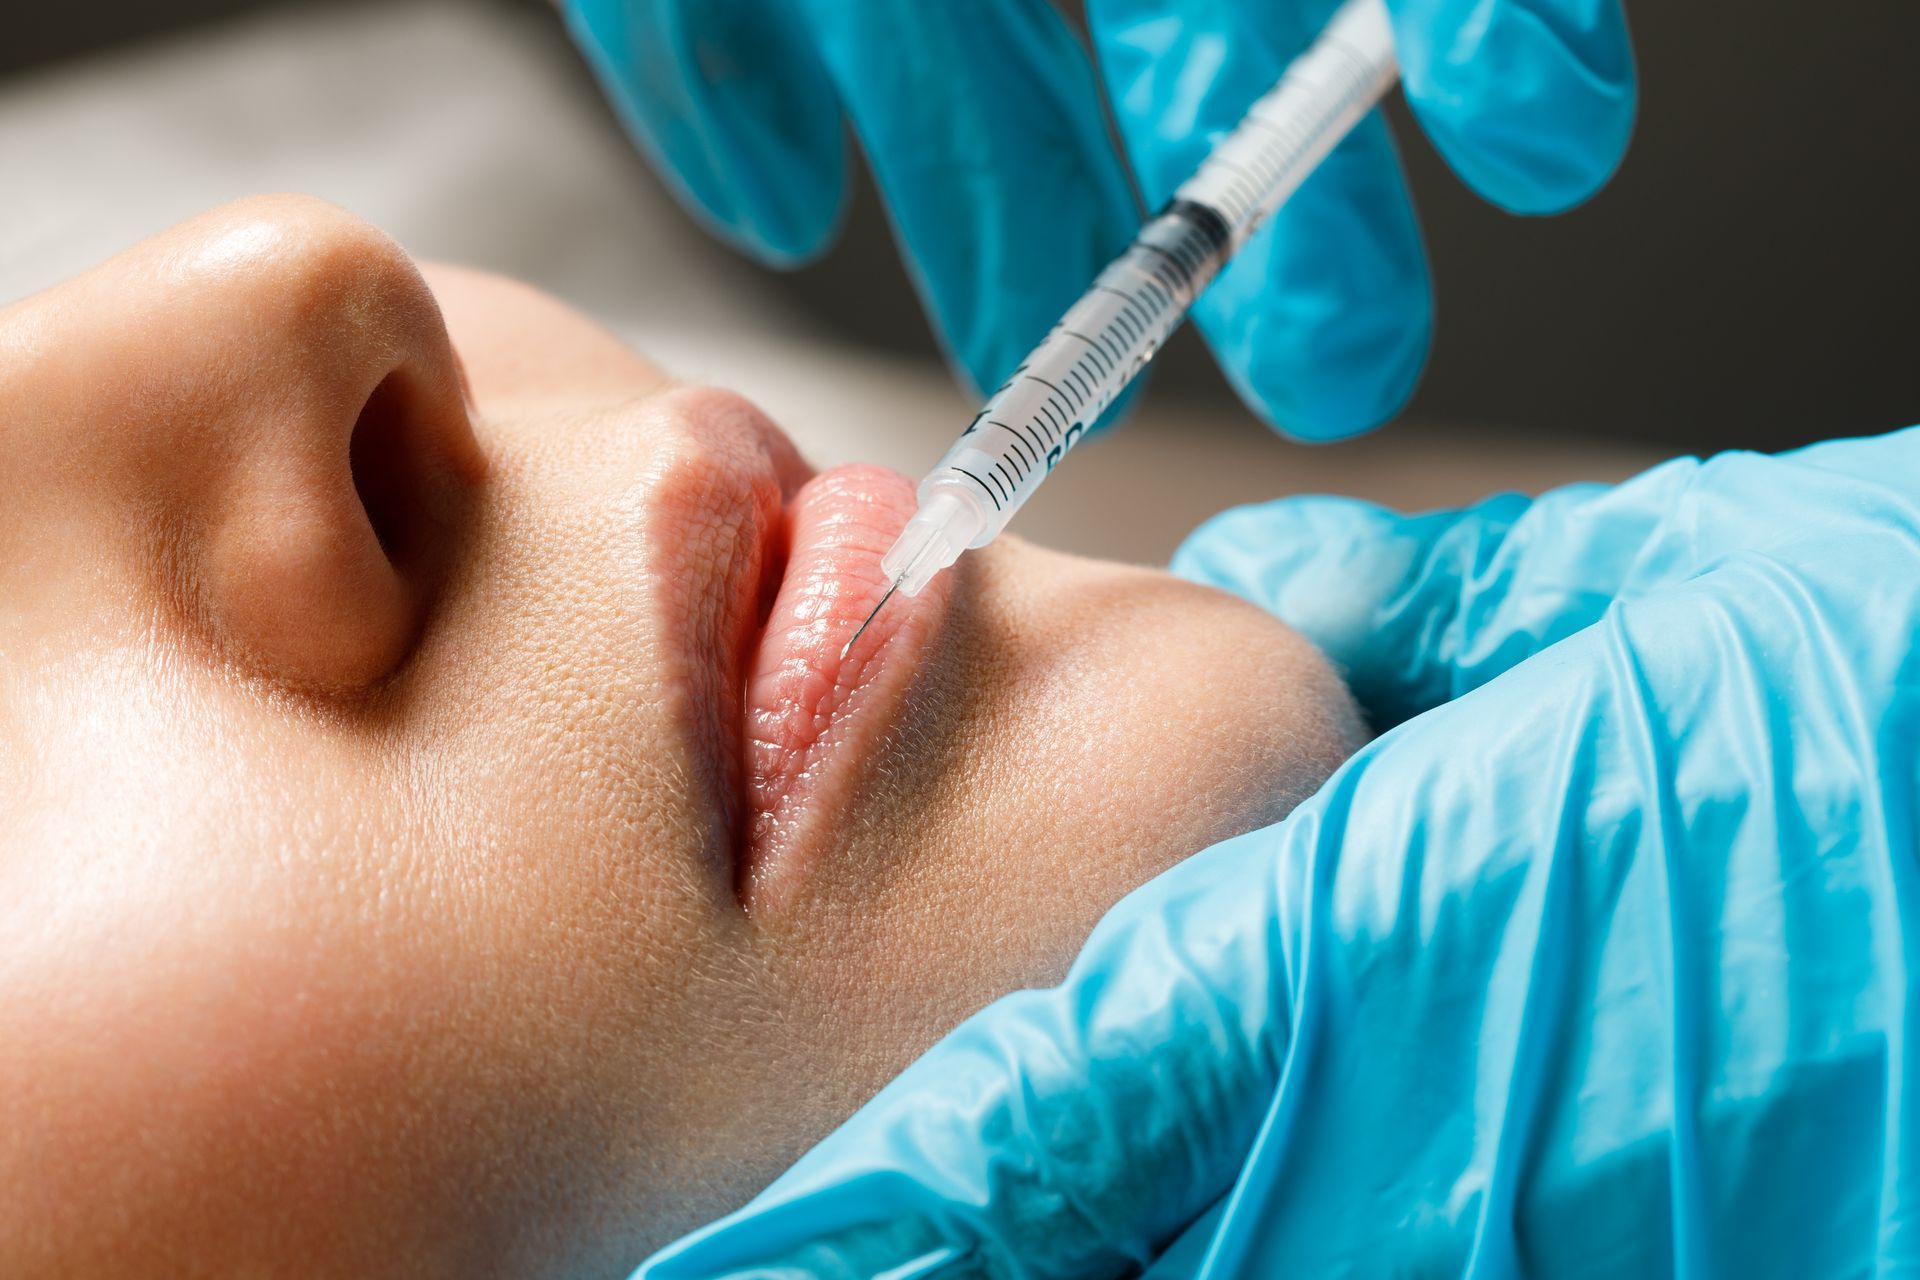 a woman is getting a botox injection in her lips .